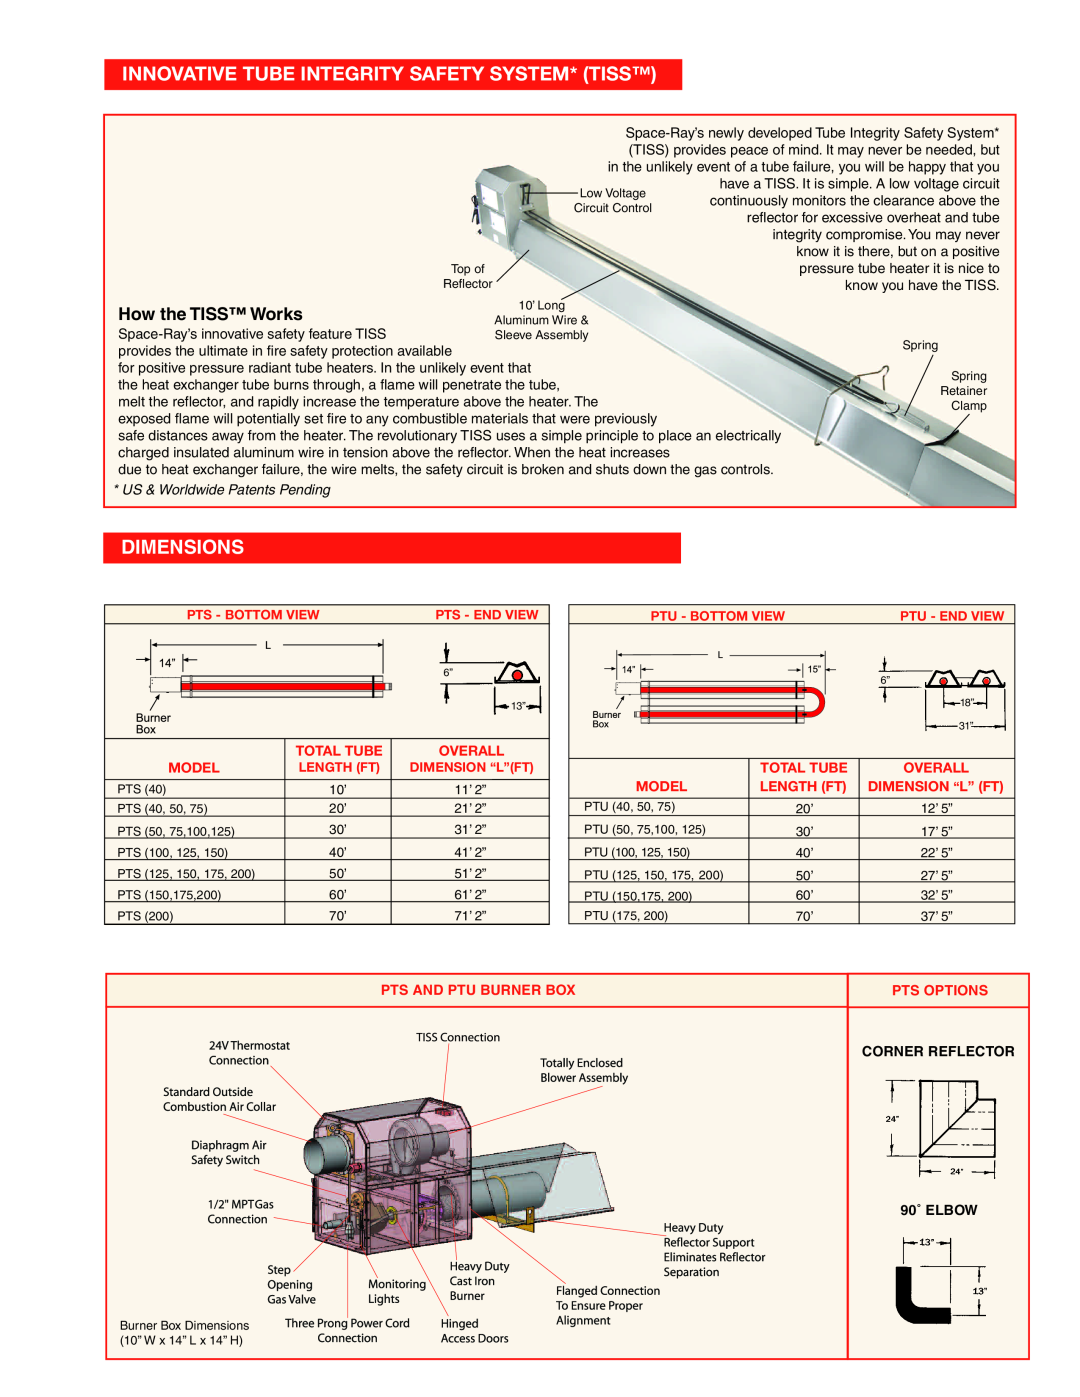 Gas-Fired Products PTS Innovative Tube Integrity Safety System* Tiss, Dimensions, How the TISS Works, Model, Pts Options 